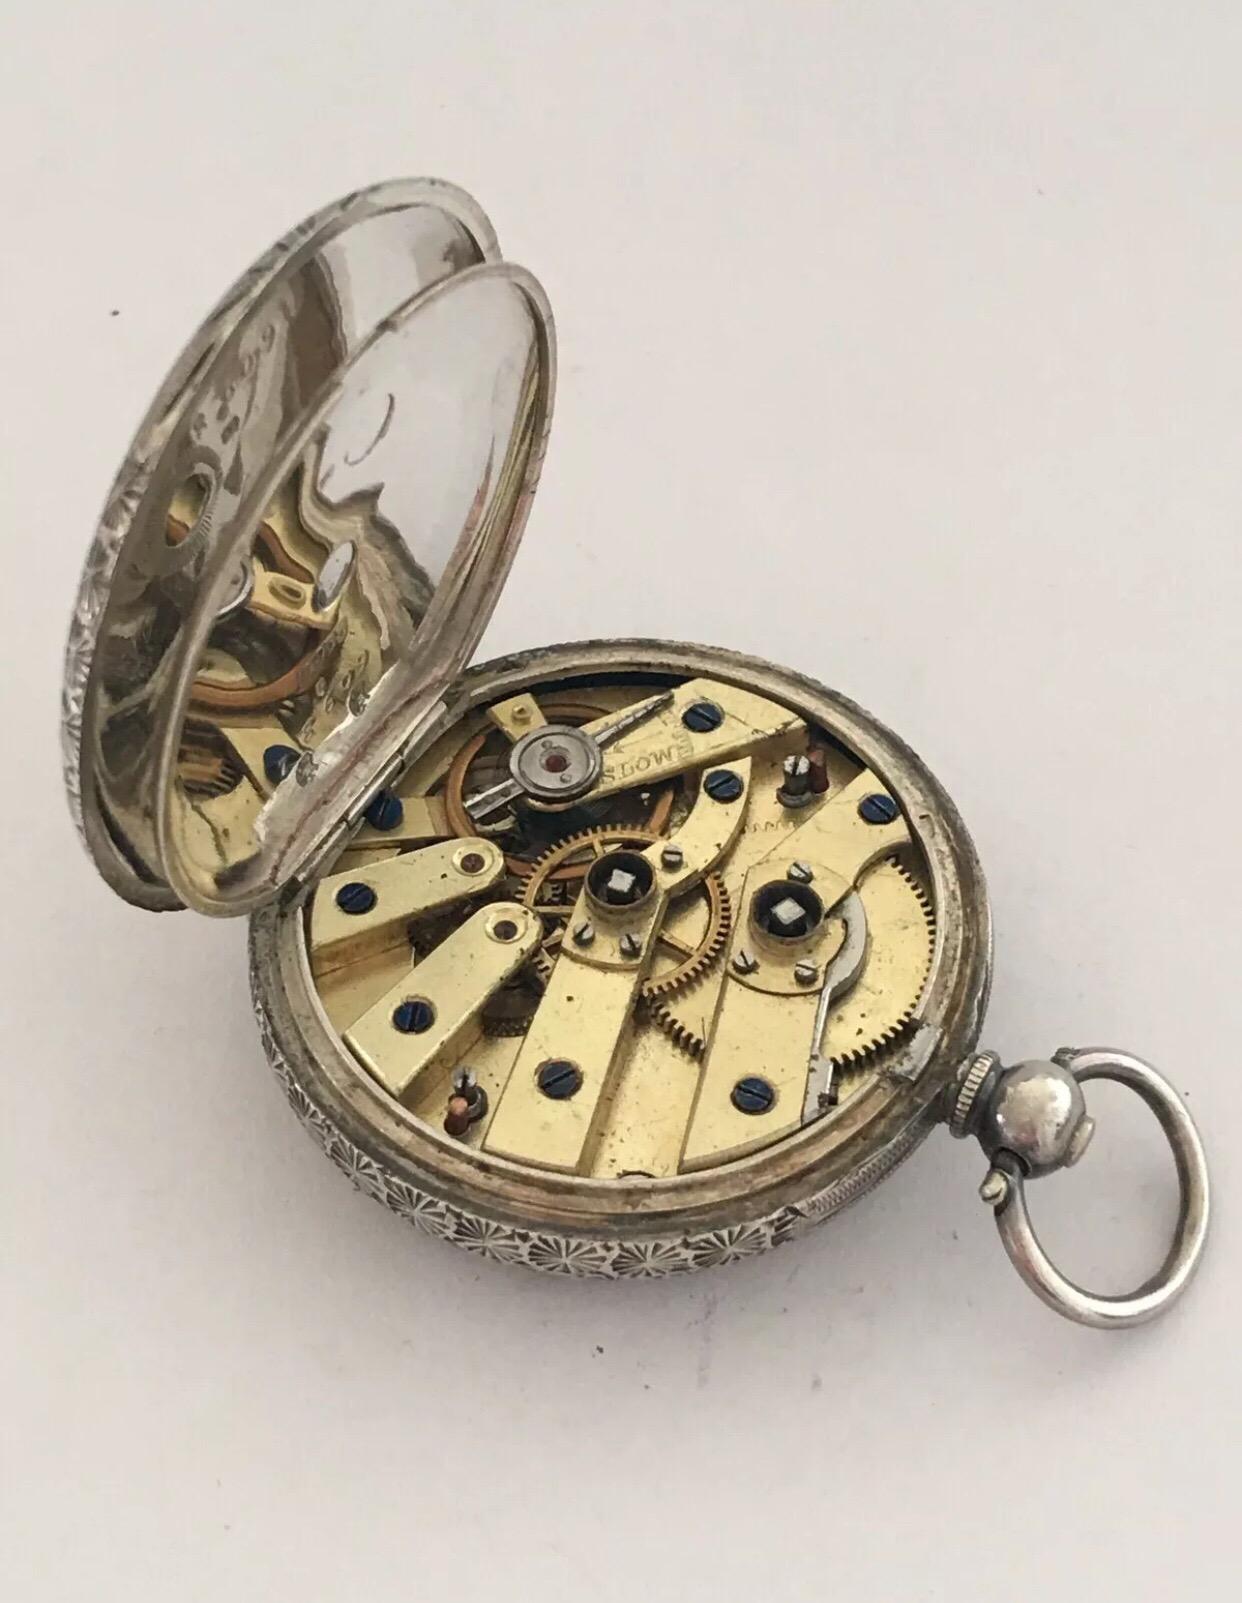 Antique Silver with Pink Enamel and Gold Inlaid Dial Key Wind Pocket Watch 1